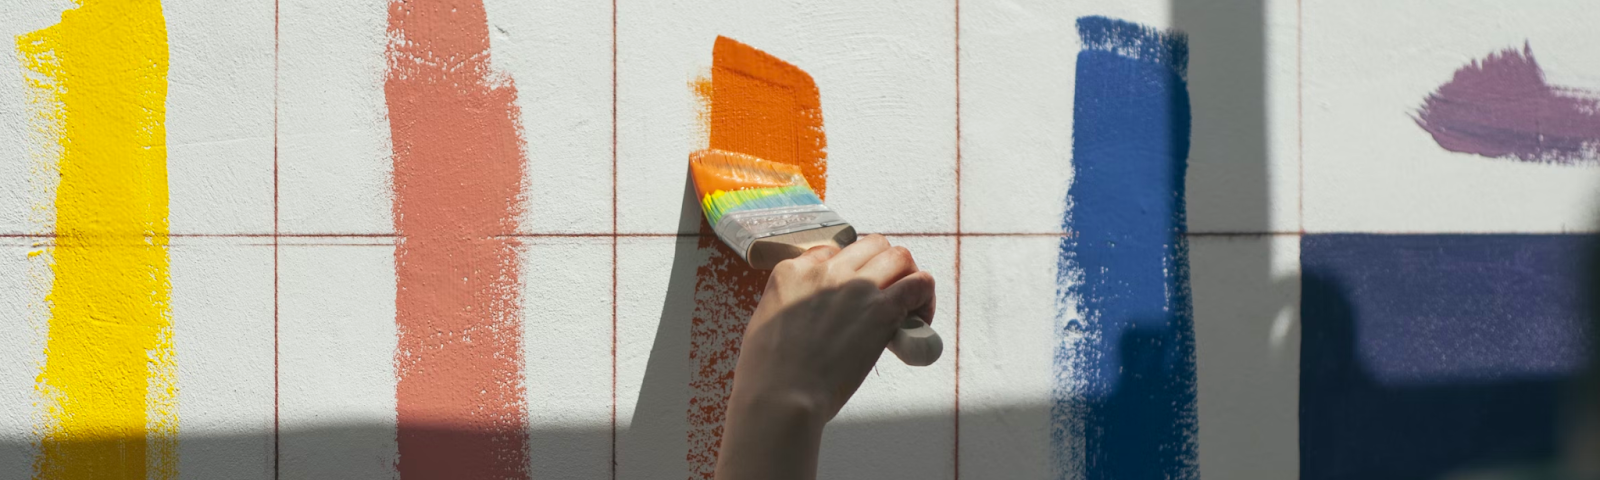 A person using a paintbrush to apply paint to a wall.